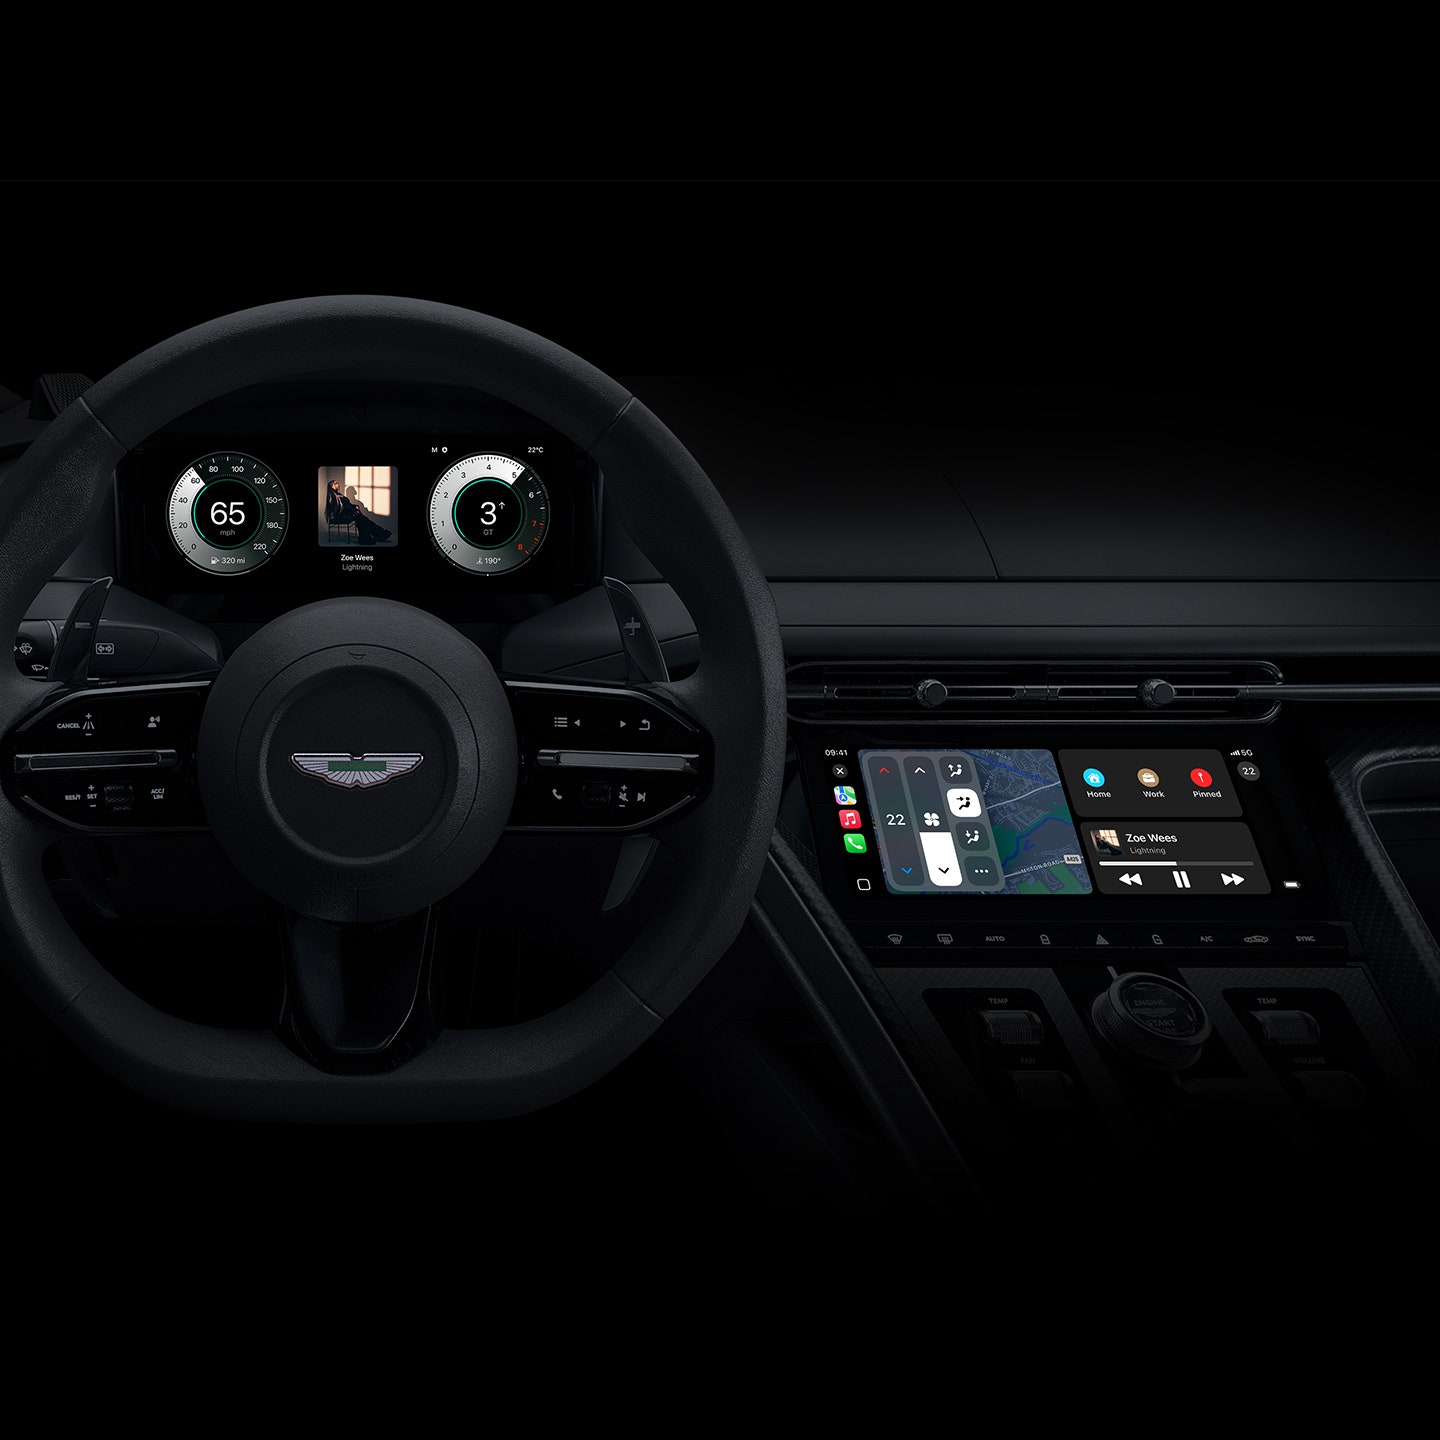 Apple’s CarPlay revolution is coming to Aston Martin and Porsche from 2024